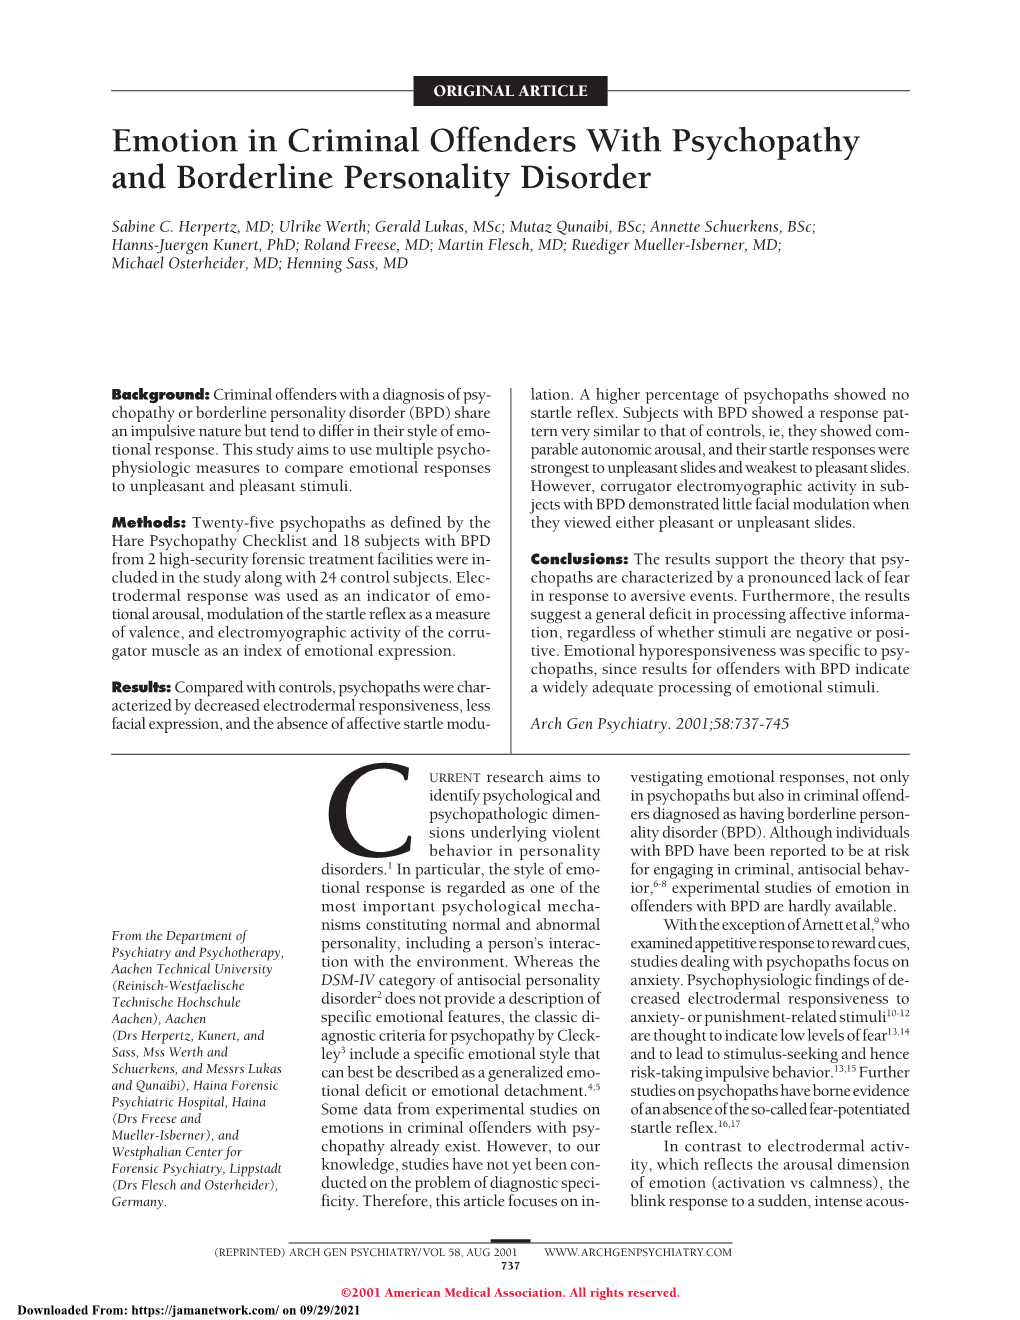 Emotion in Criminal Offenders with Psychopathy and Borderline Personality Disorder